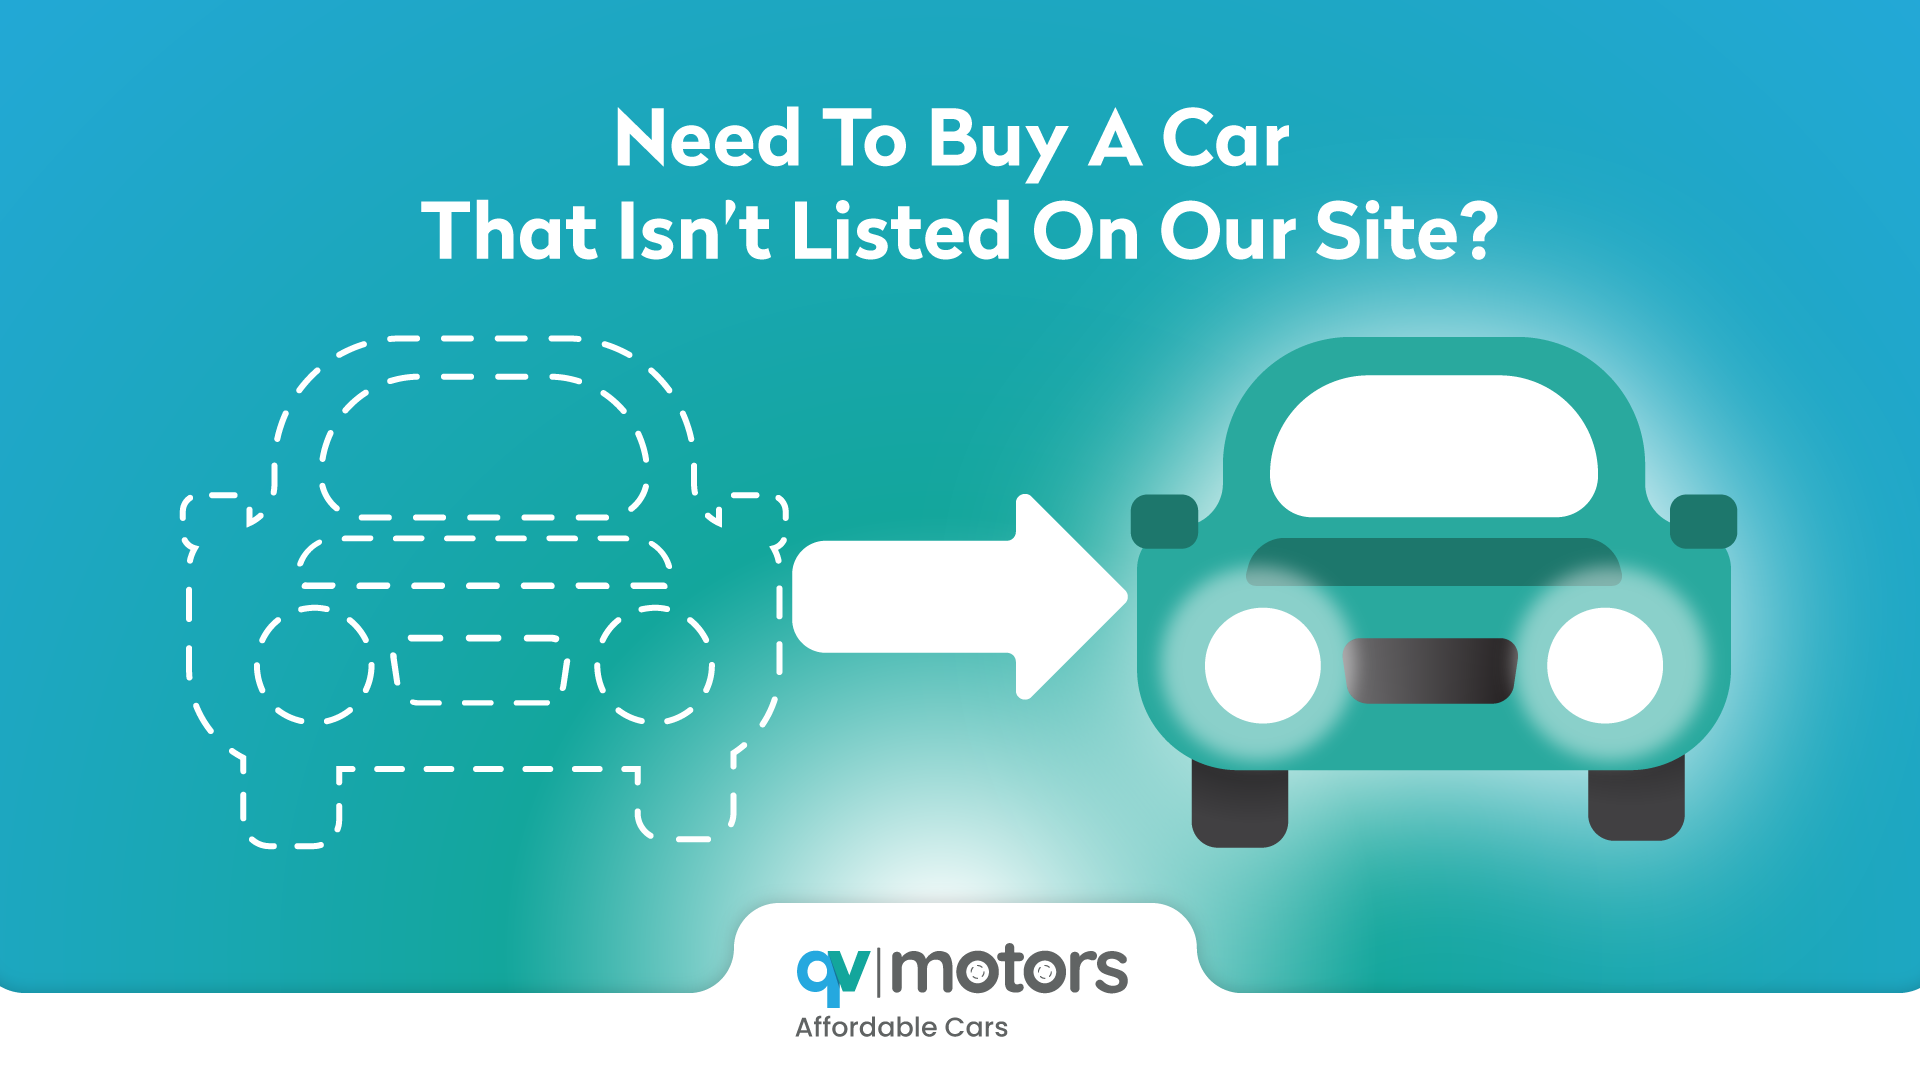 Need to Buy a Car That Isn’t Listed On Our Site?